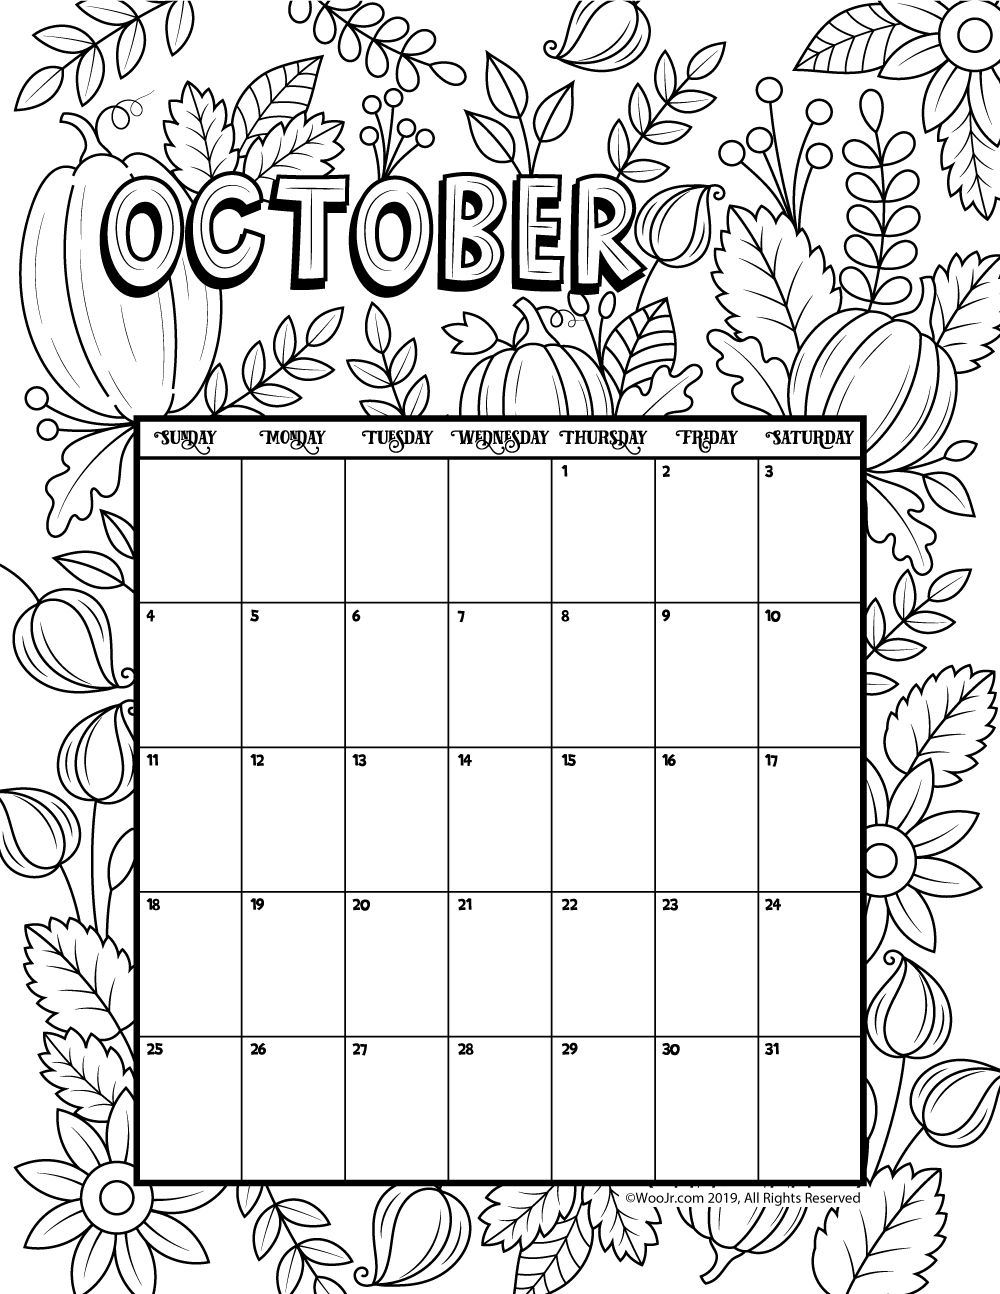 Collect October 2021 Calendar To Color And Print